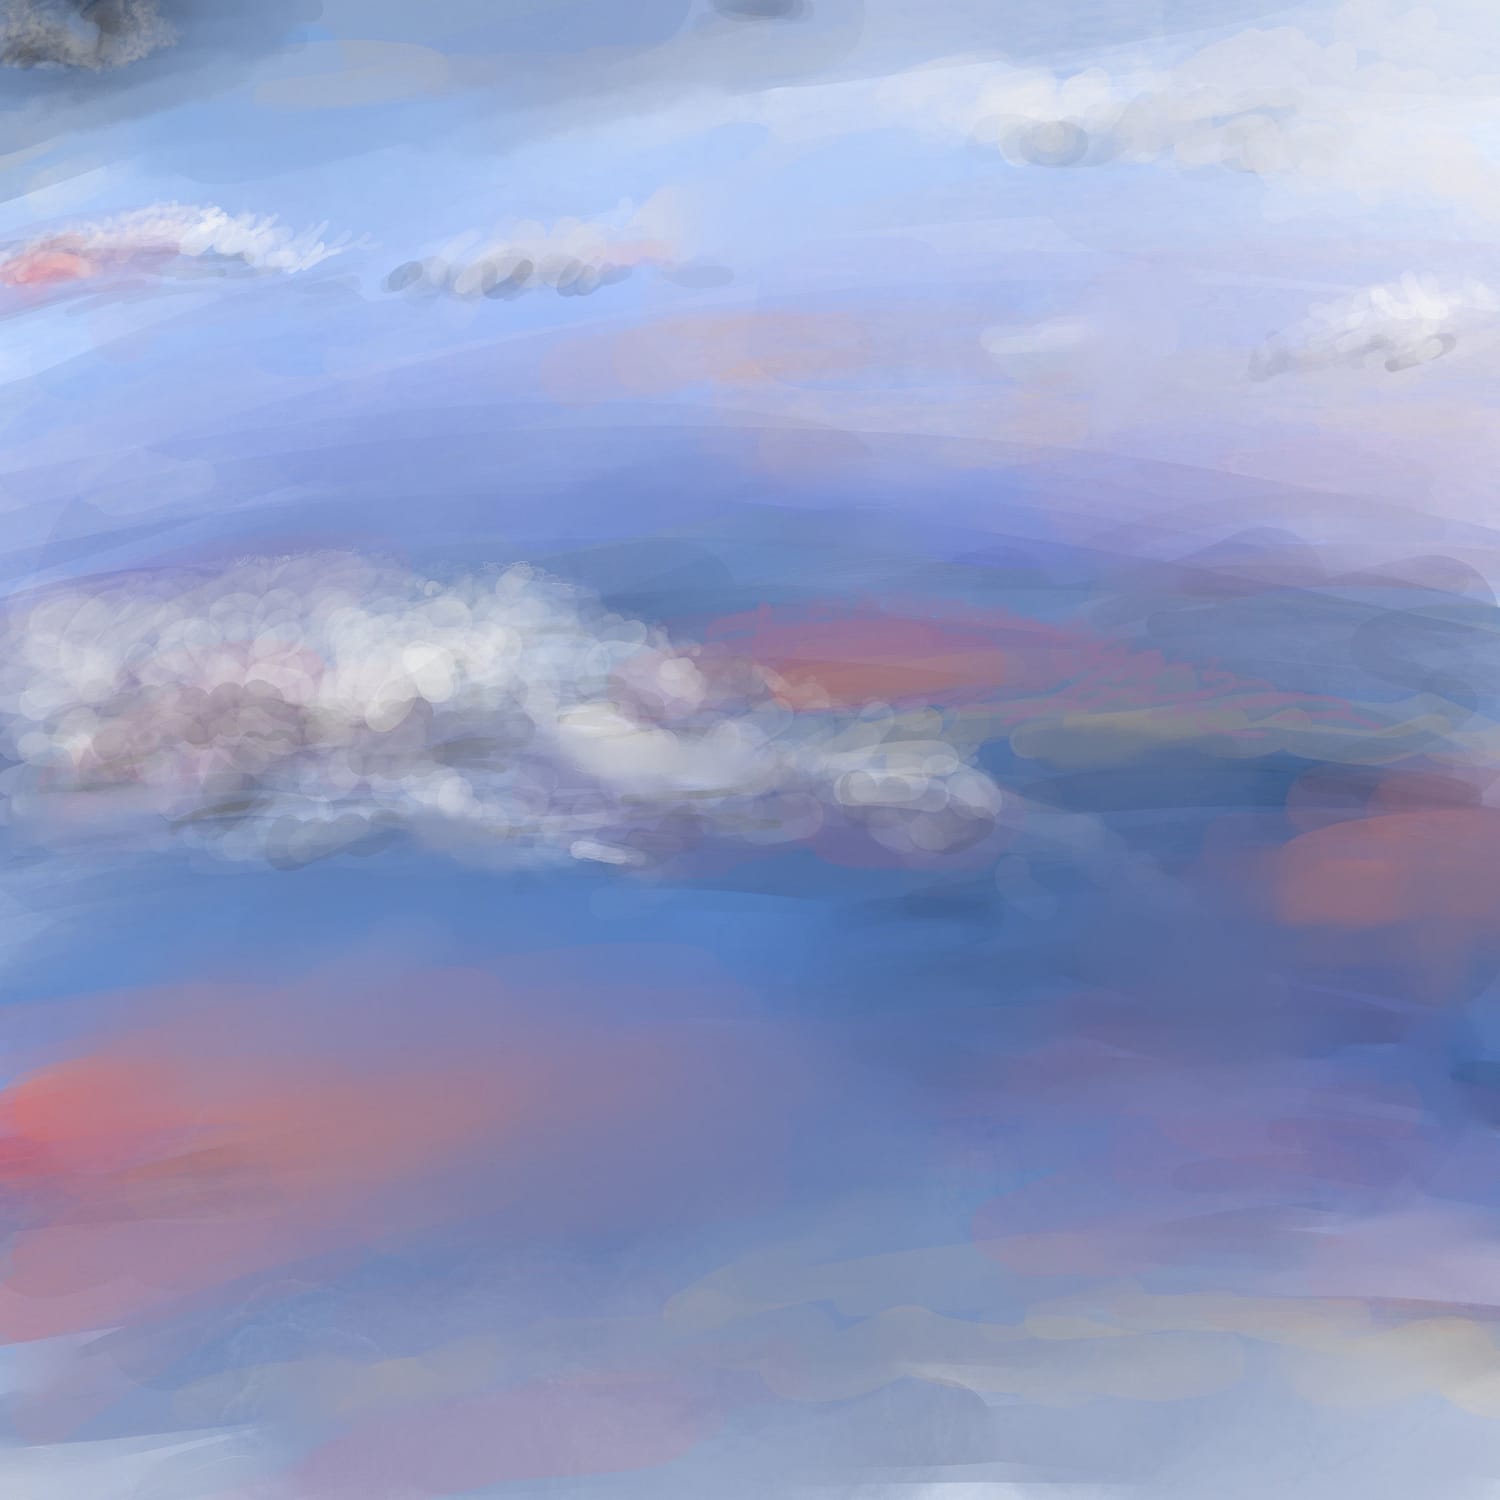 Sky over ocean - Artwork - Abstract digital artwork of a beautiful cloudy sky over an ocean lit in vivid colours